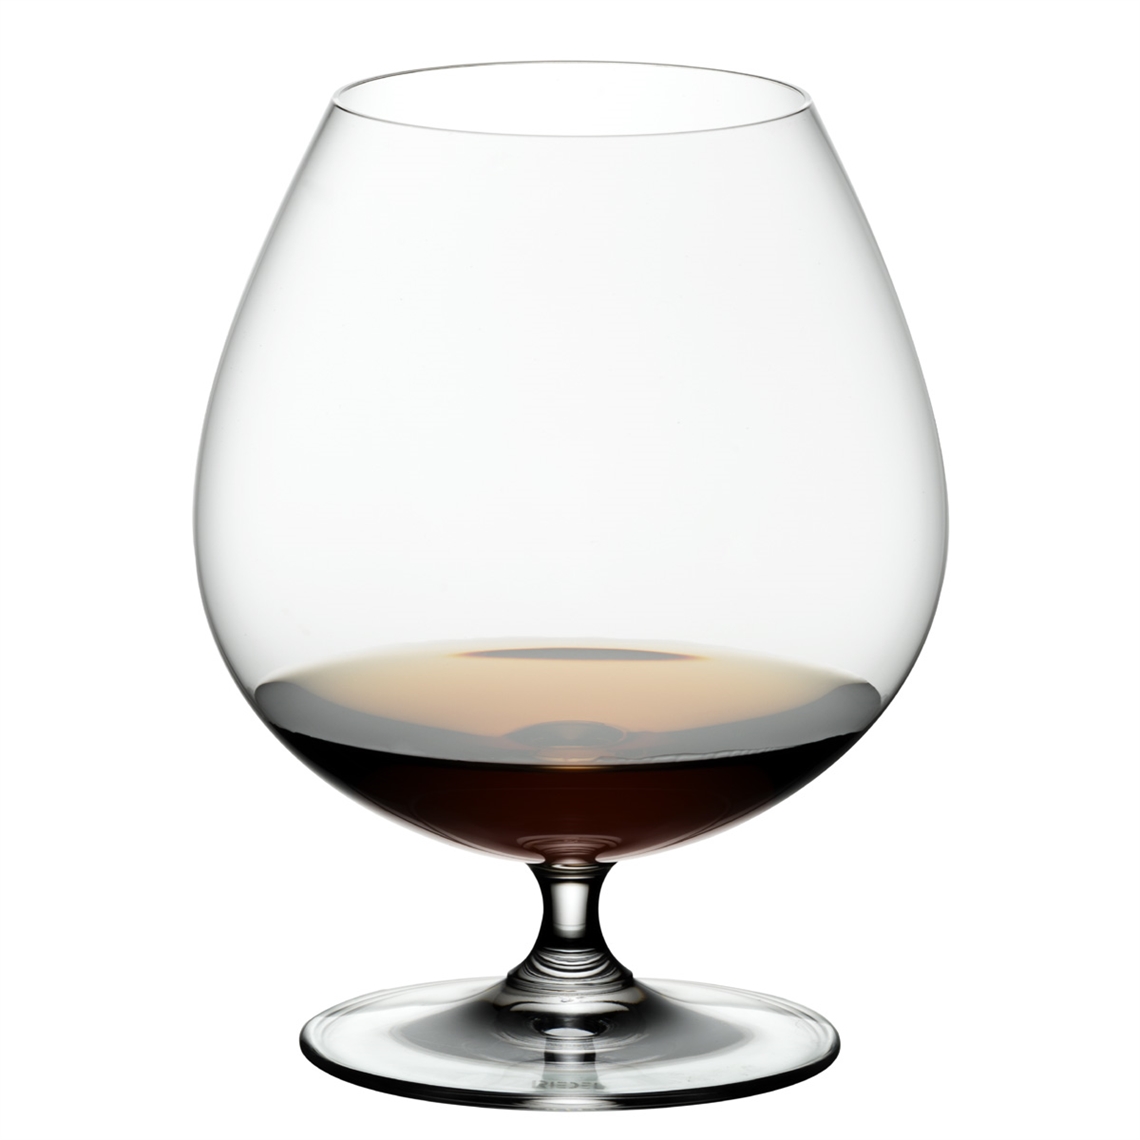 View more grassl glass from our Spirit Glasses range